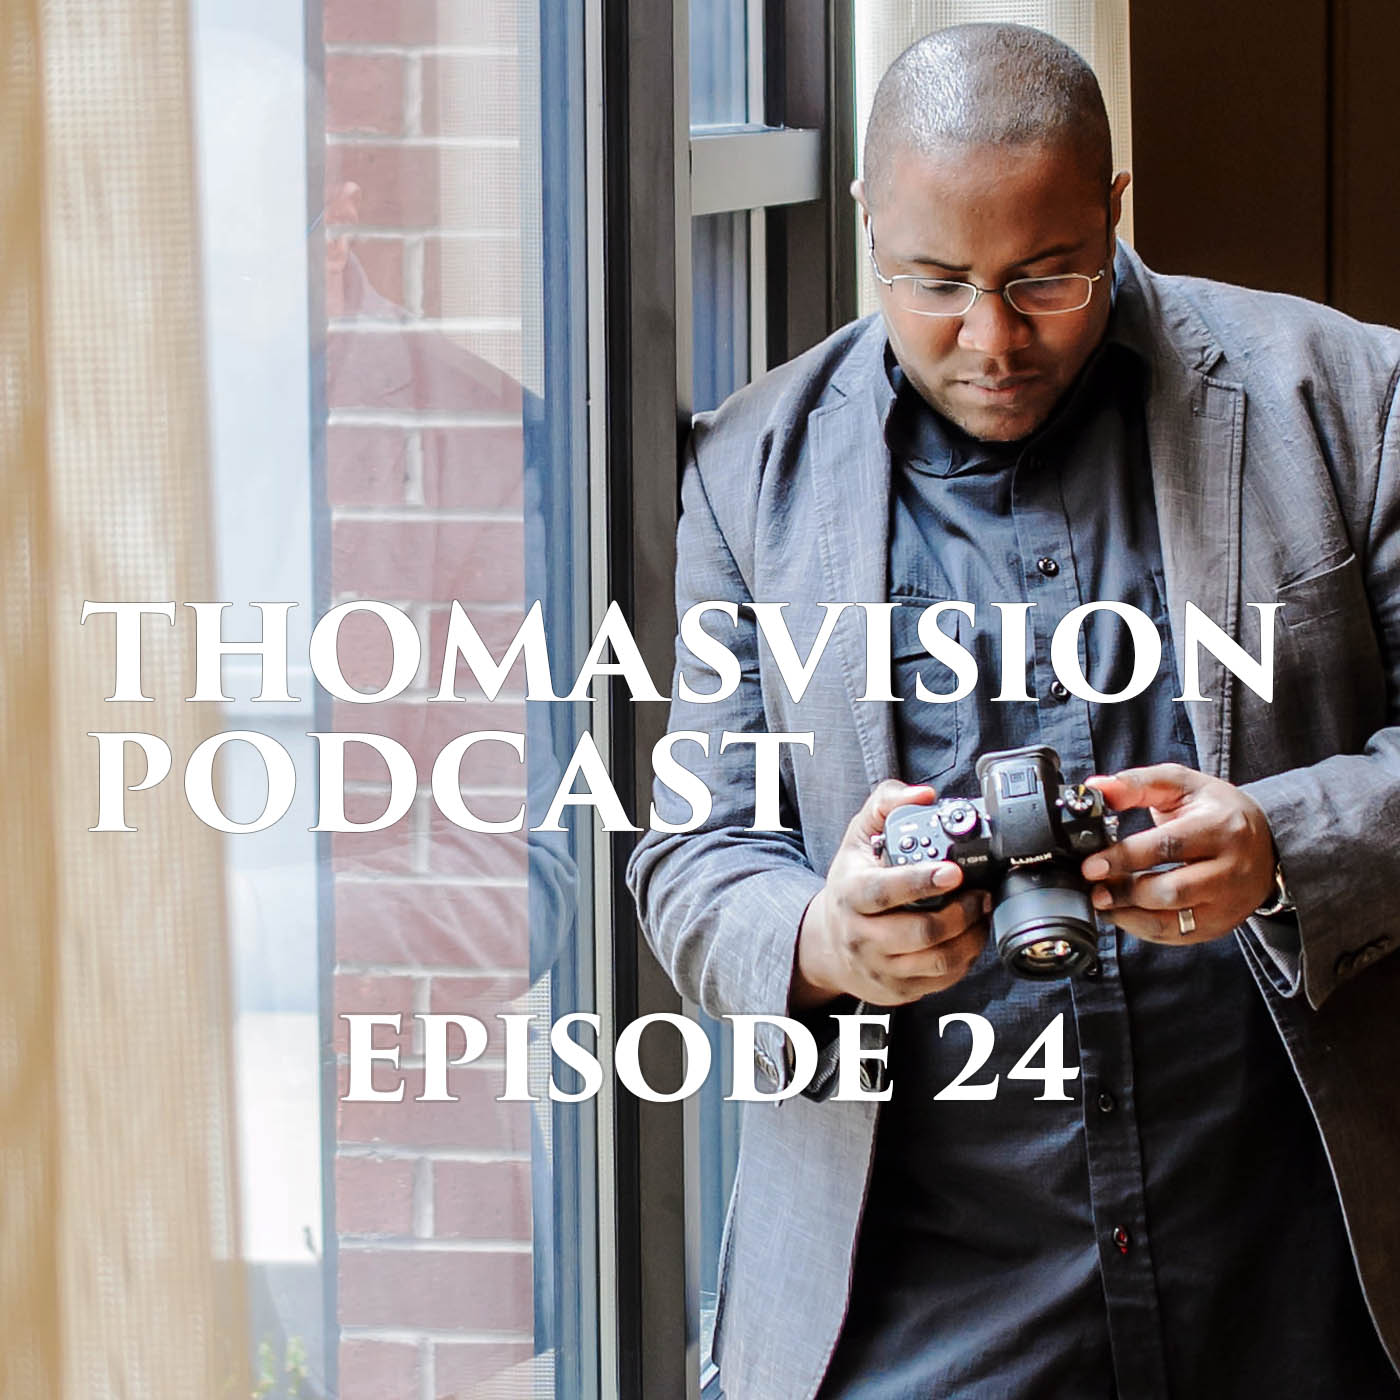 Ep 24. A Lewis Films - ThomasVision Podcast